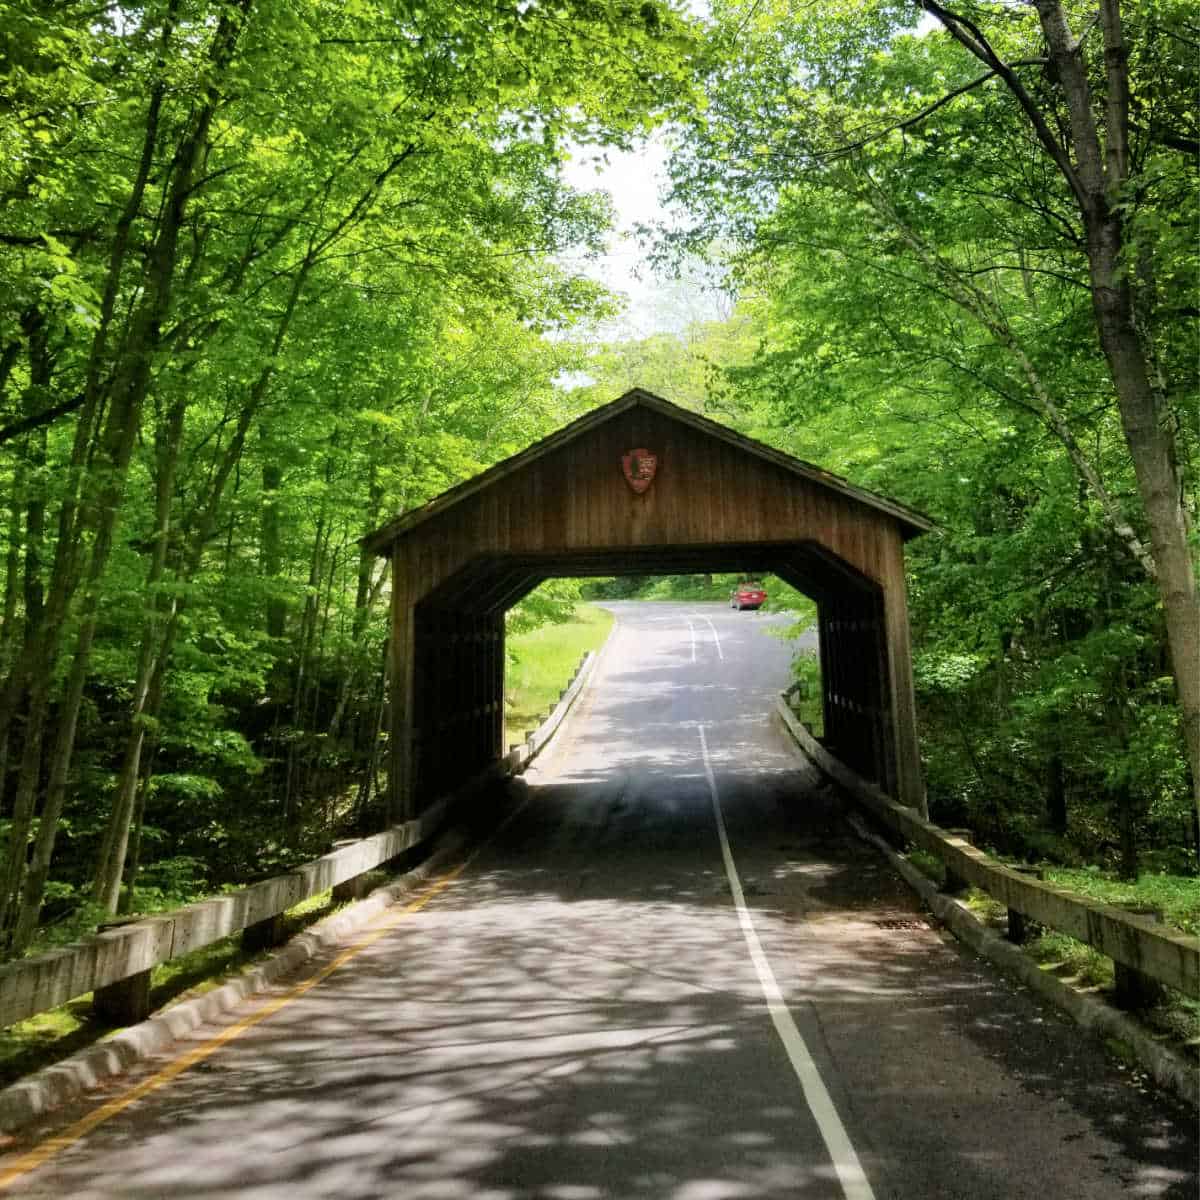 Discover covered bridges like the one in the pictuure from Sleeping Bear Dunes National Lakeshore while discovering Michigan's National Parks